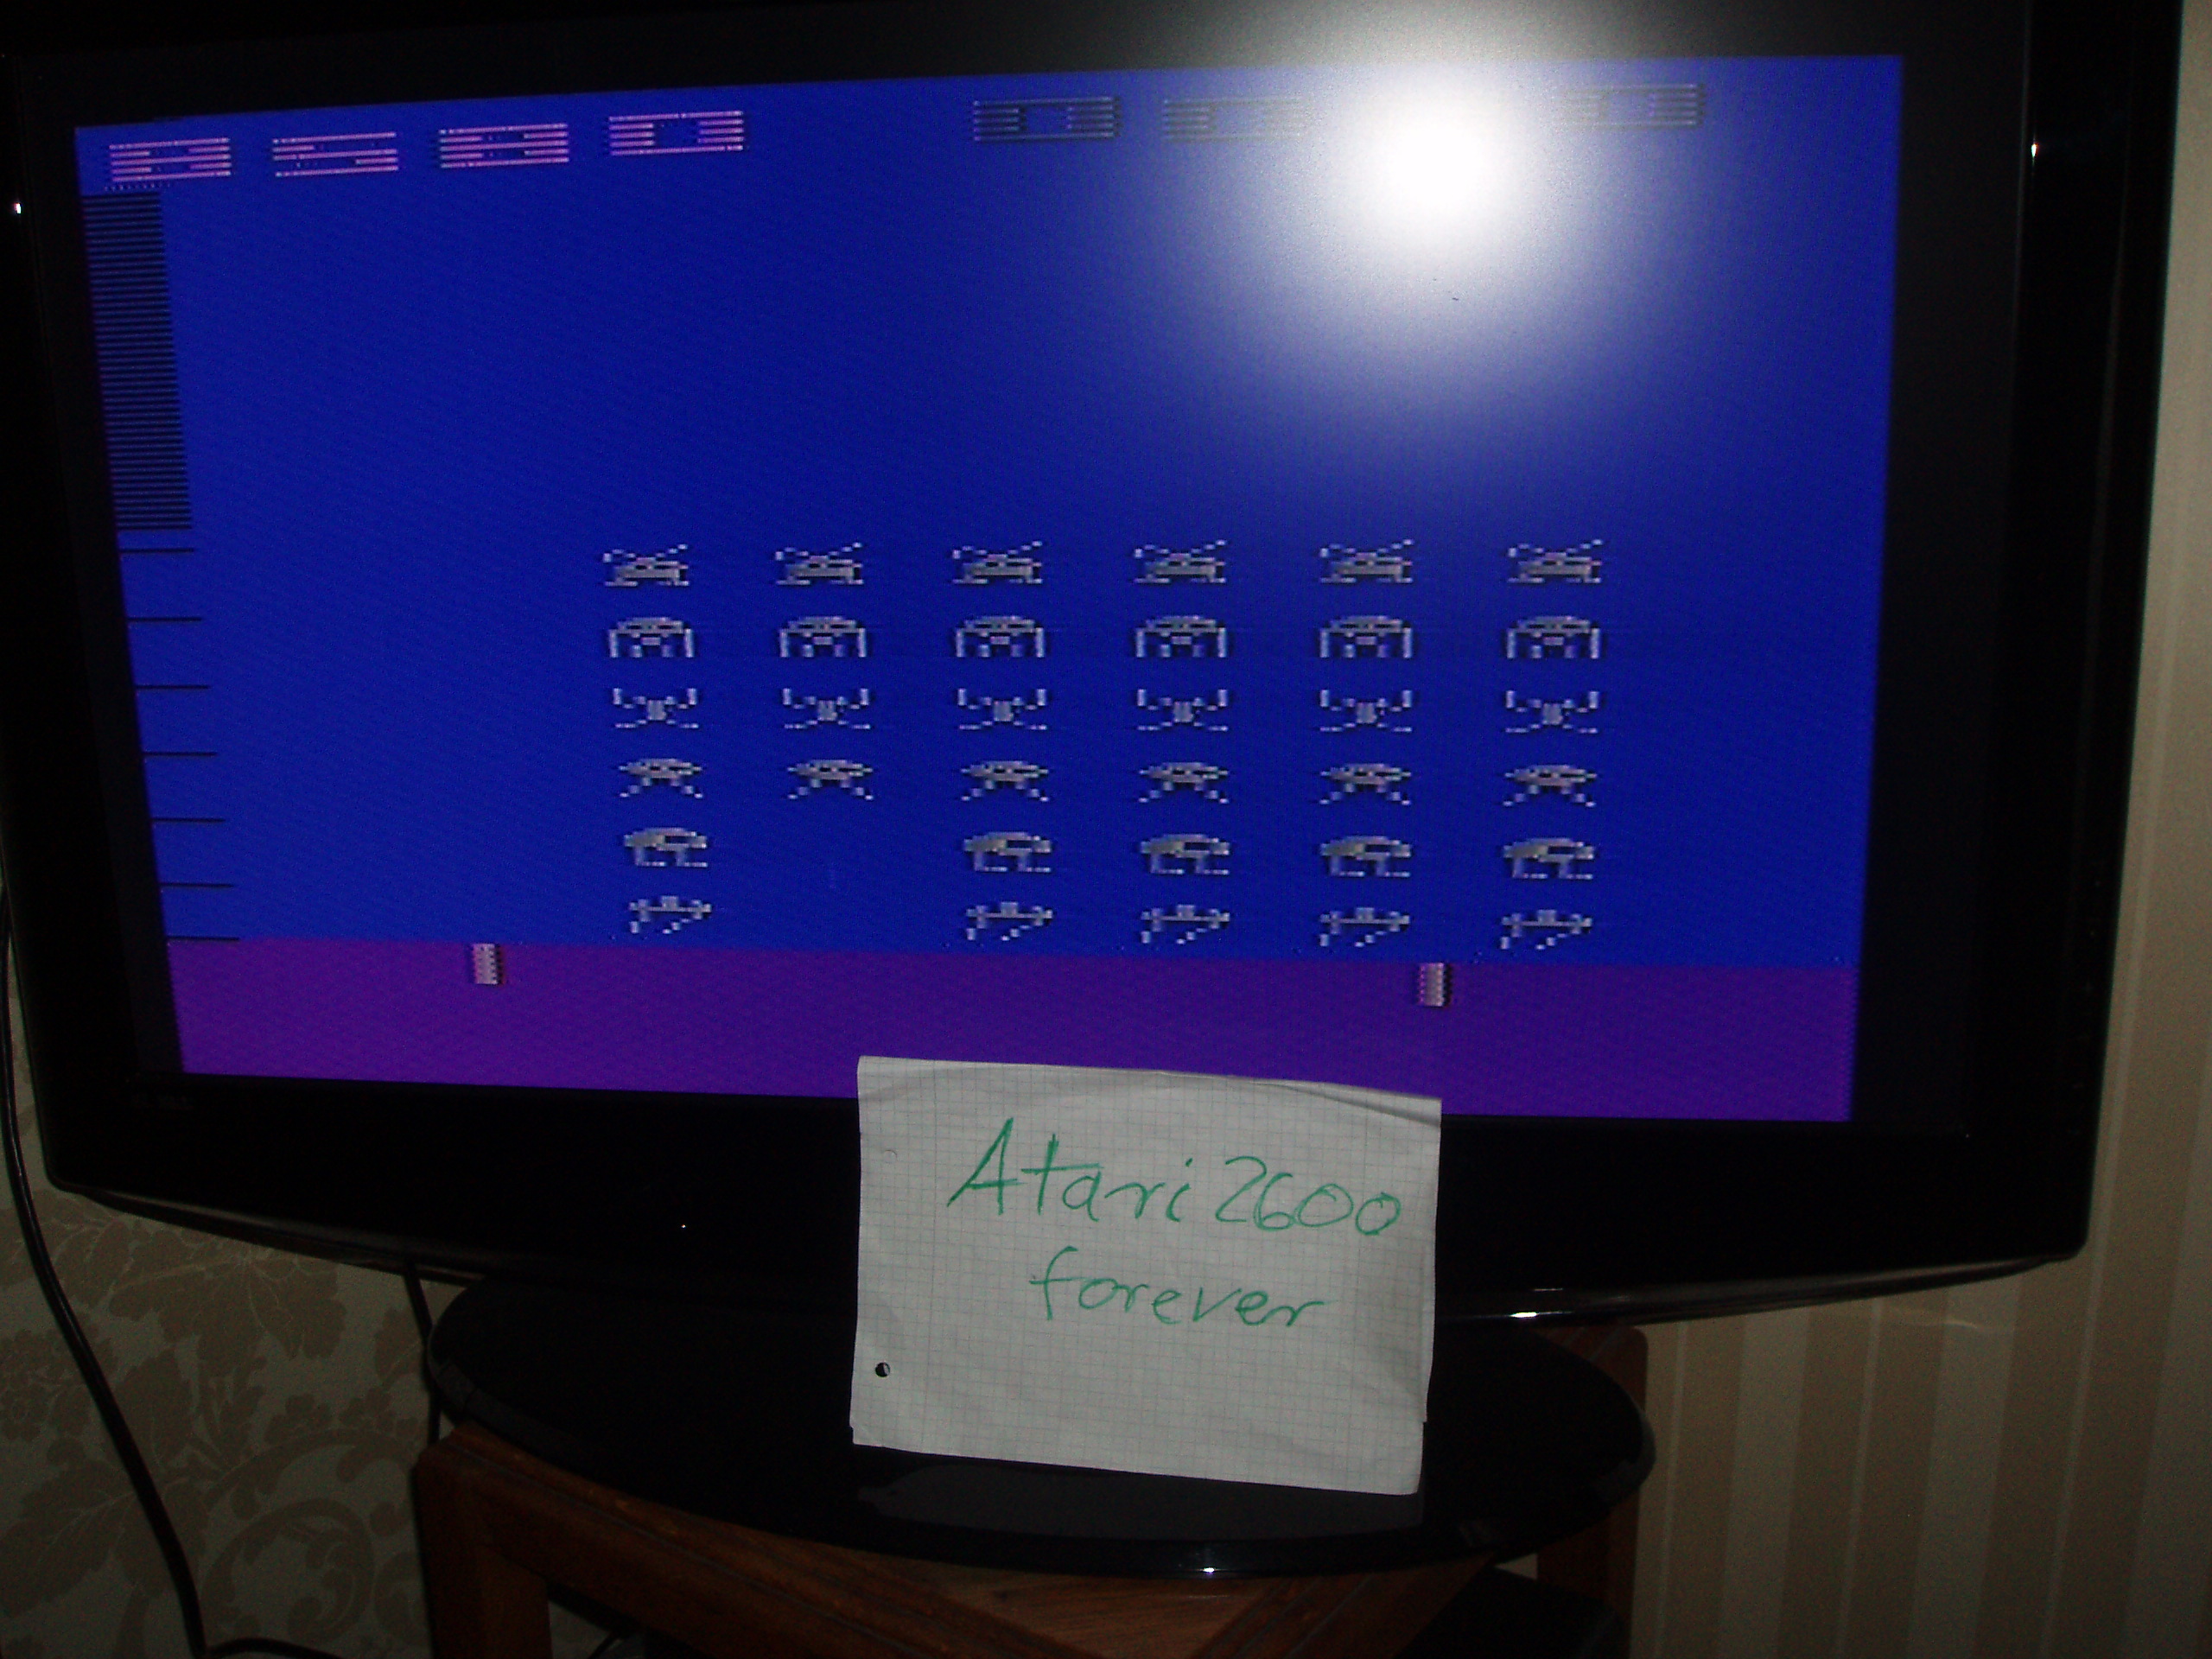 atari2600forever: Space Invaders (Atari 2600 Novice/B) 8,580 points on 2016-11-30 04:41:24